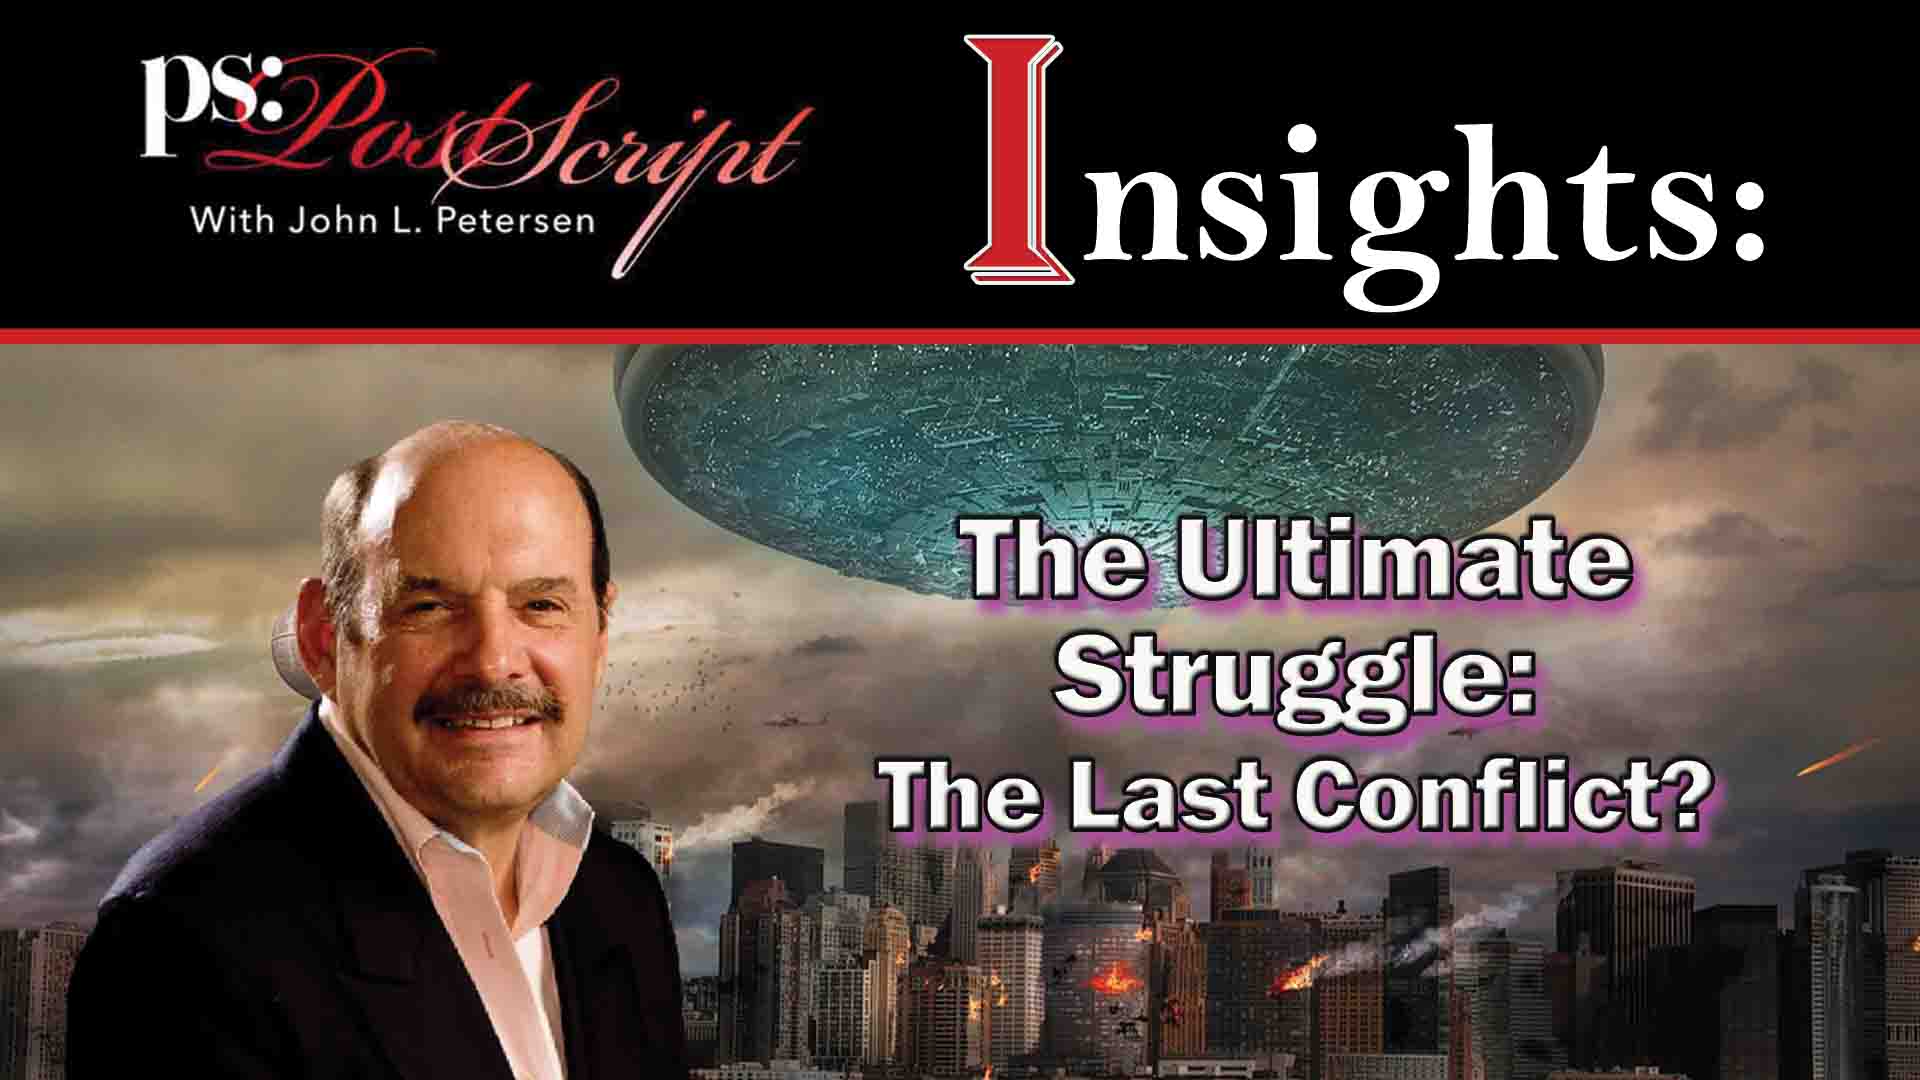 Futurist, John Petersen explores a scenario of a covert power struggle between global elites, termed 'white hats' and 'black hats.' As these factions negotiate their final moves, John emphasizes the importance of preparation for potential societal upheavals and the rebuilding of an emerging new world.